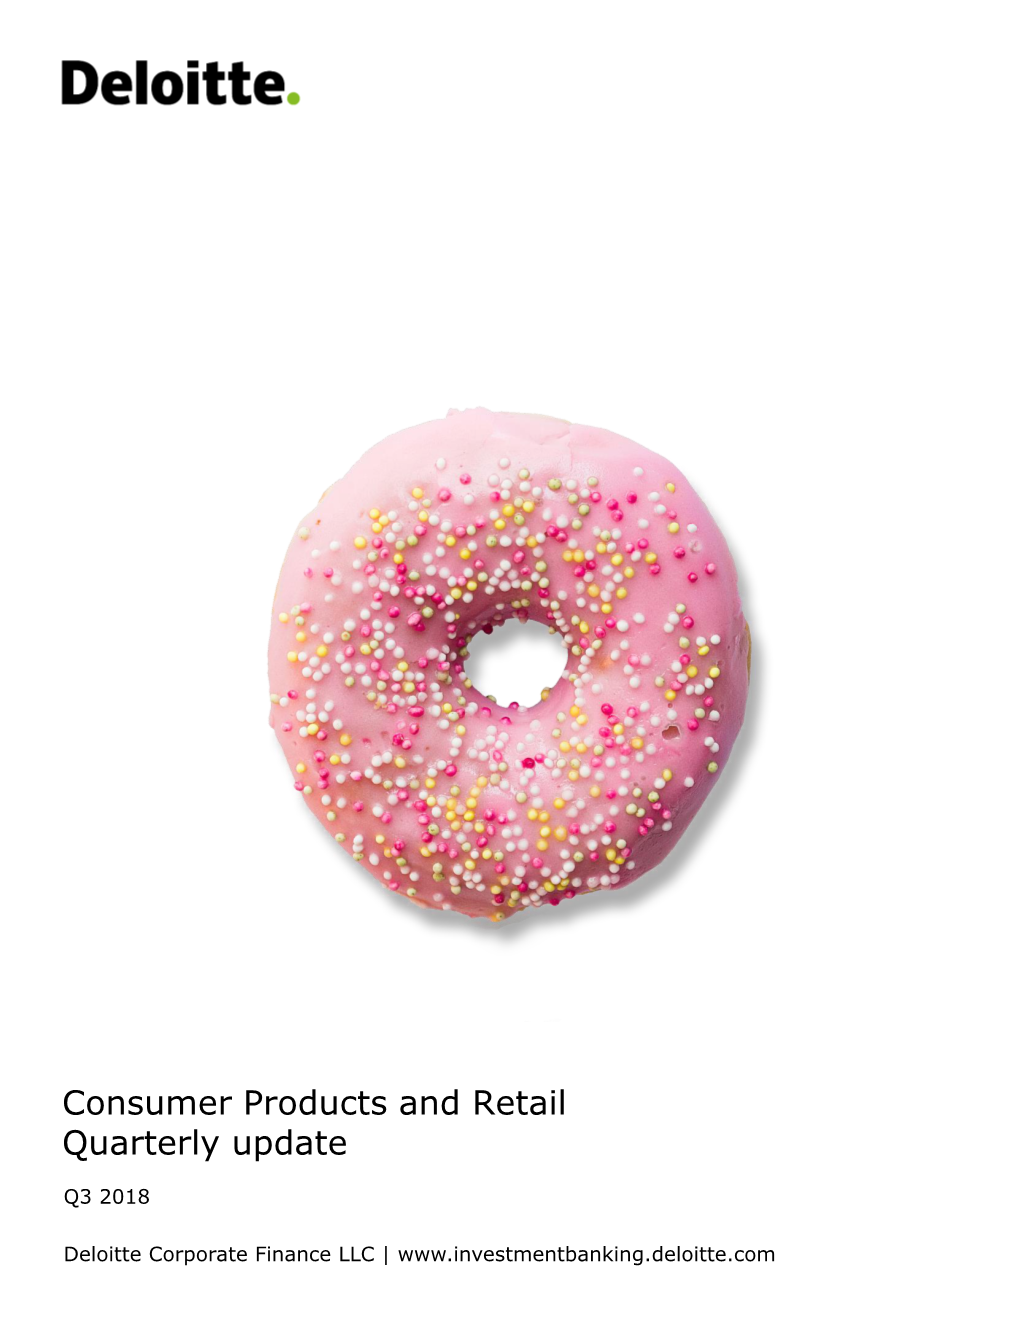 Consumer Products and Retail Quarterly Update